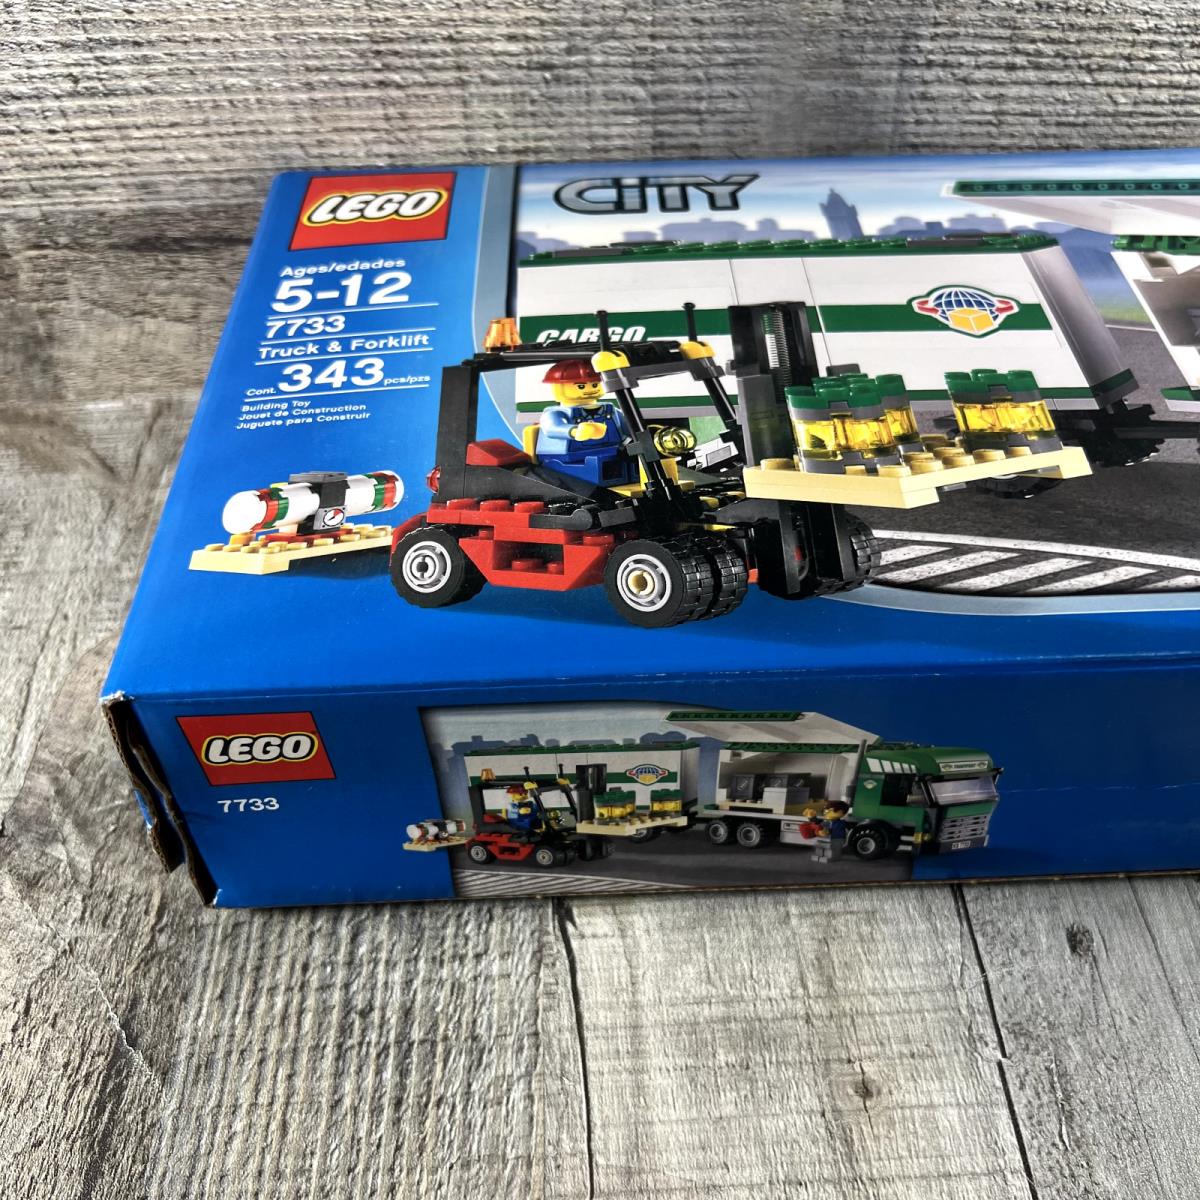 Lego City Truck and Forklift 7733 Rare Special Edition